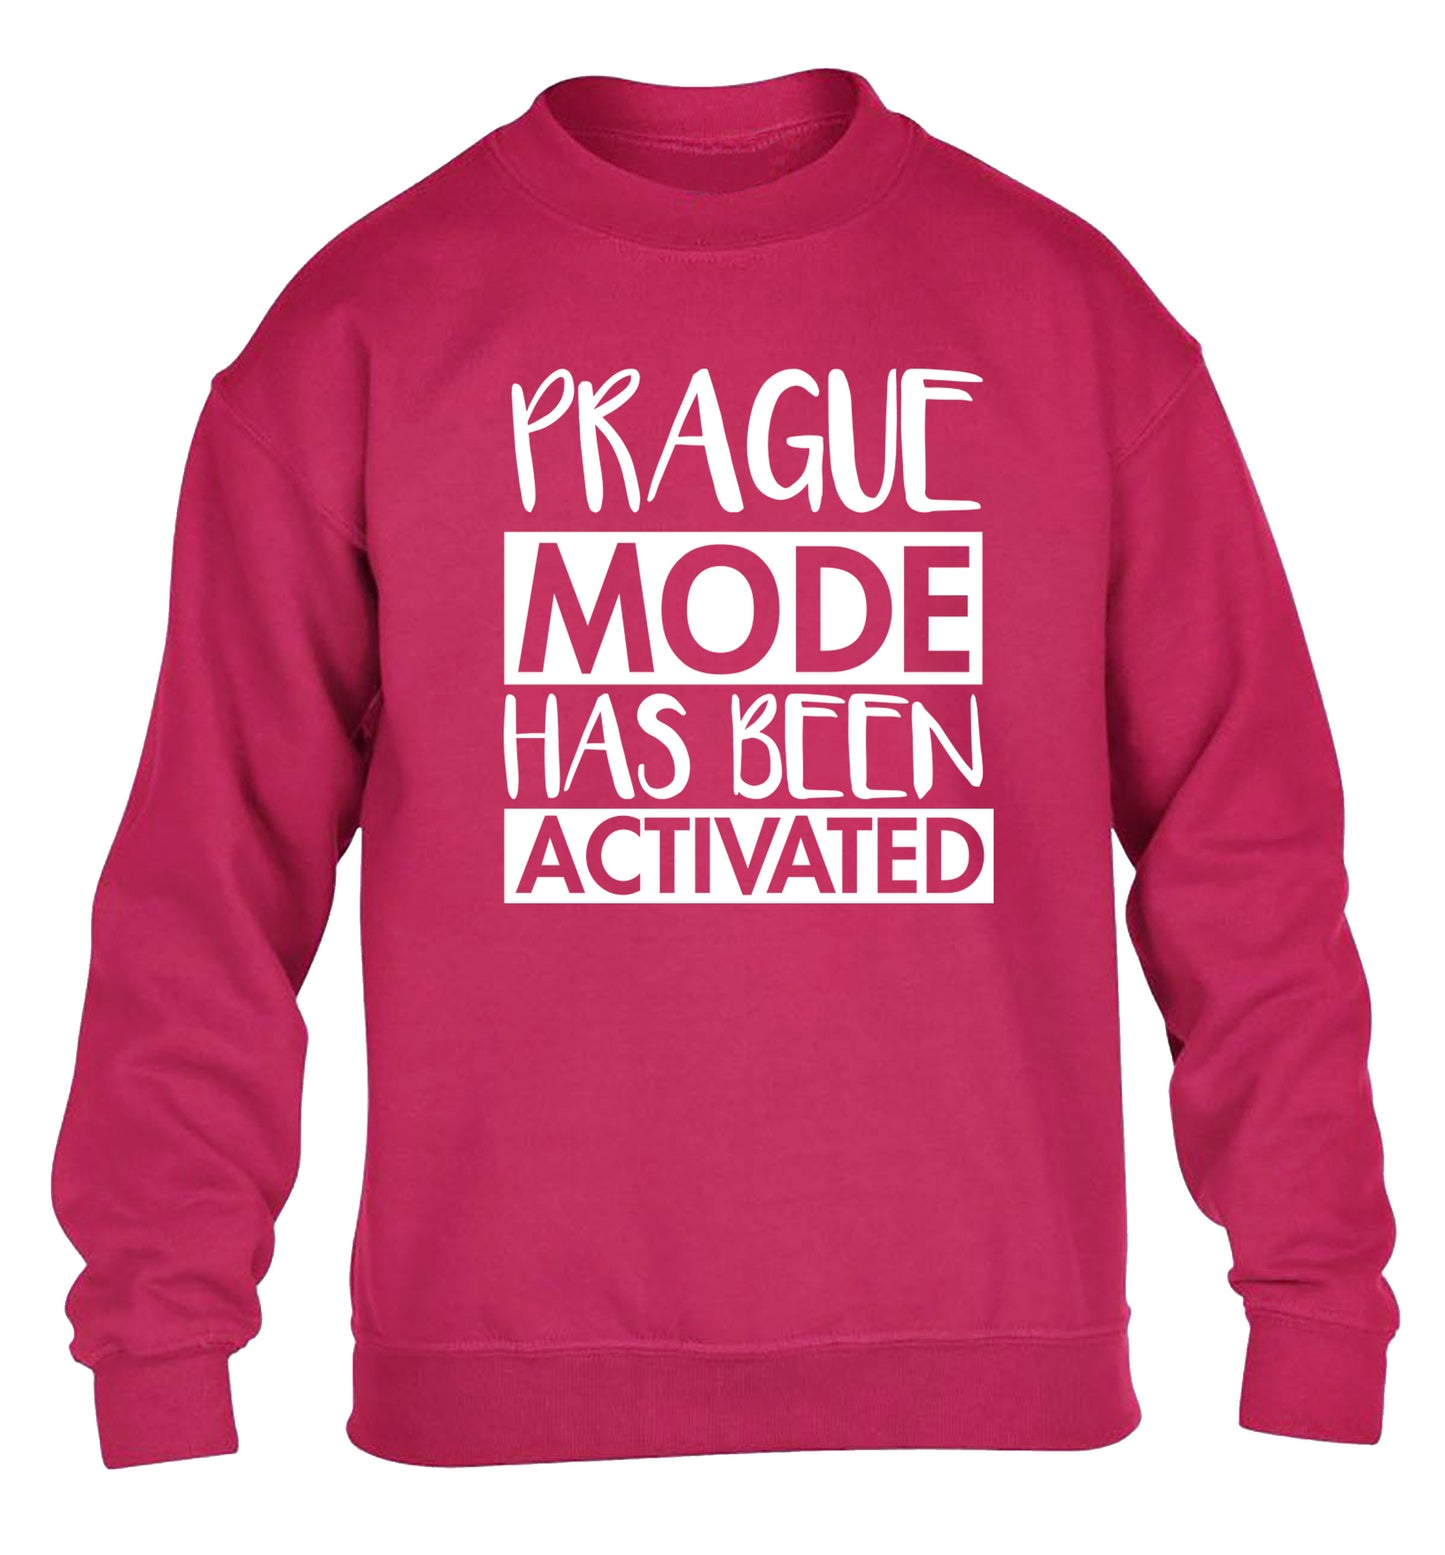 Prague mode has been activated children's pink sweater 12-13 Years